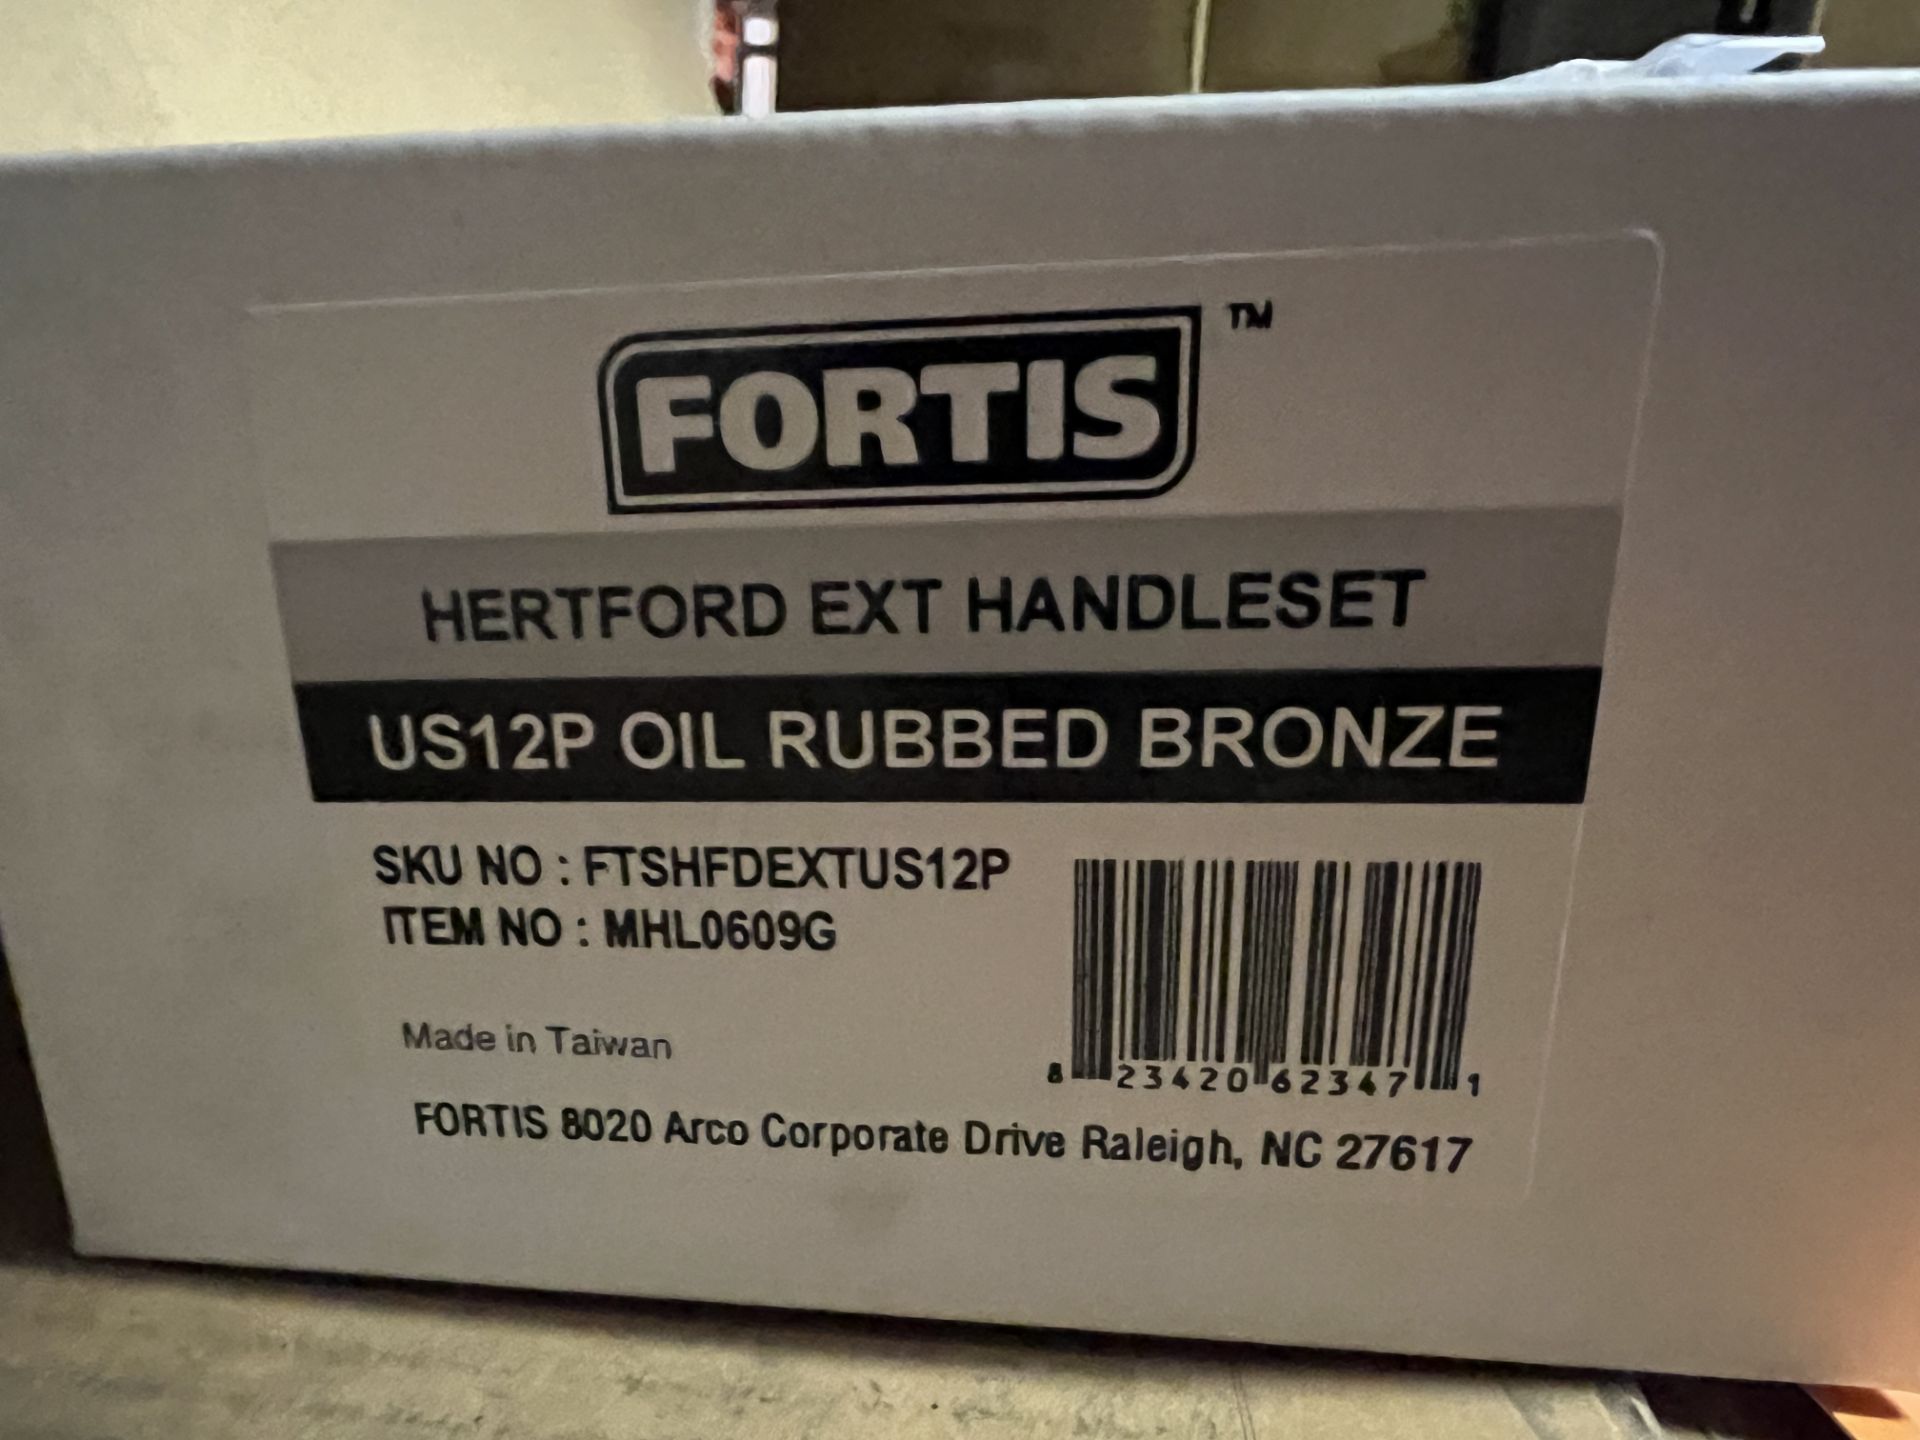 (10) FORTIS GALVESTON EXT HANDLESET US12P OIL RUBBED BRONZE - Image 3 of 3